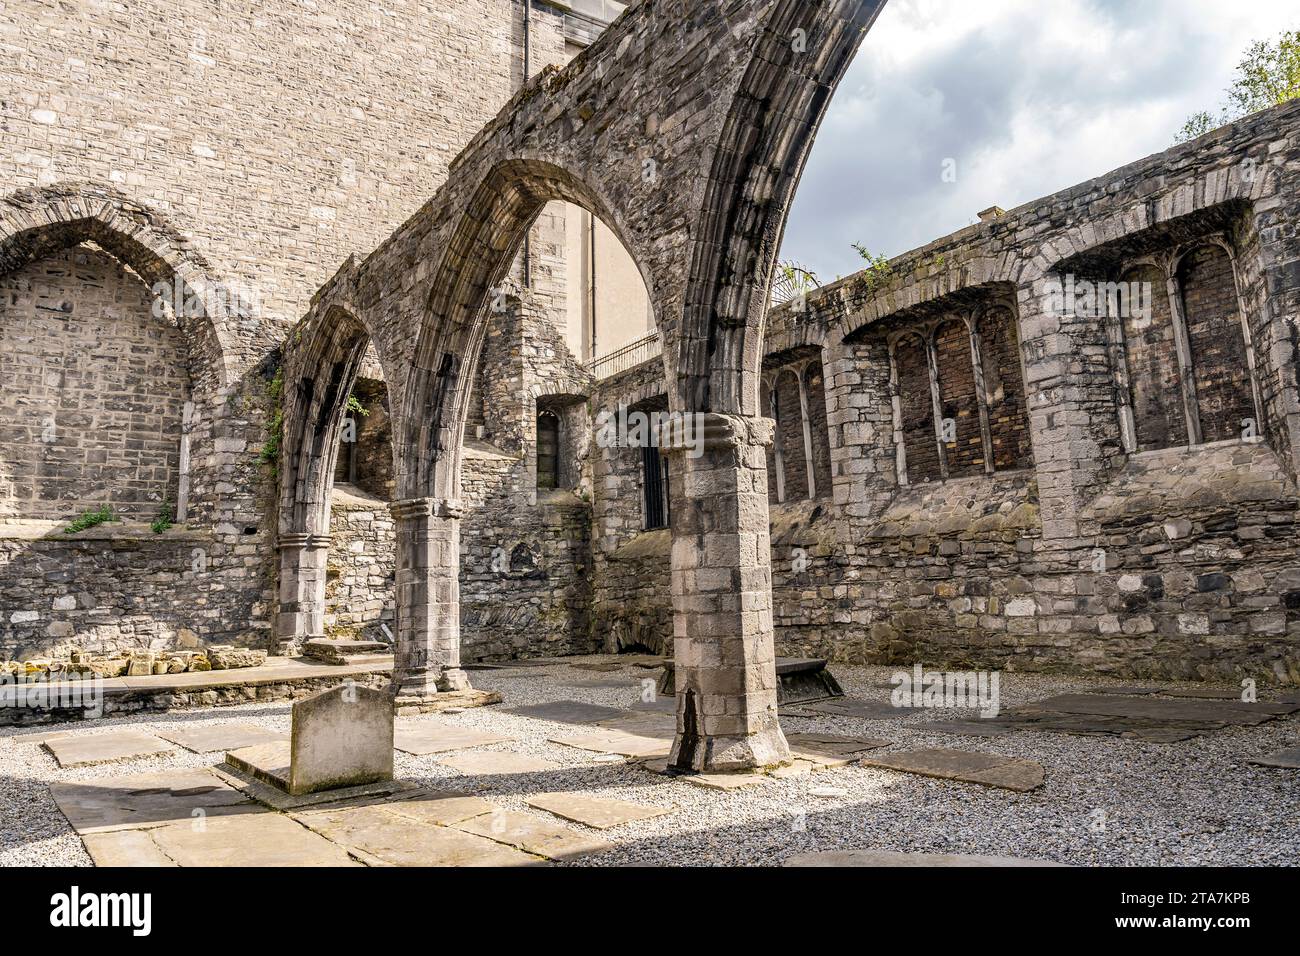 The ruins of Portlester chapel, built in the 15th century, in St Audoen's Church, Dublin city center, Ireland Stock Photo